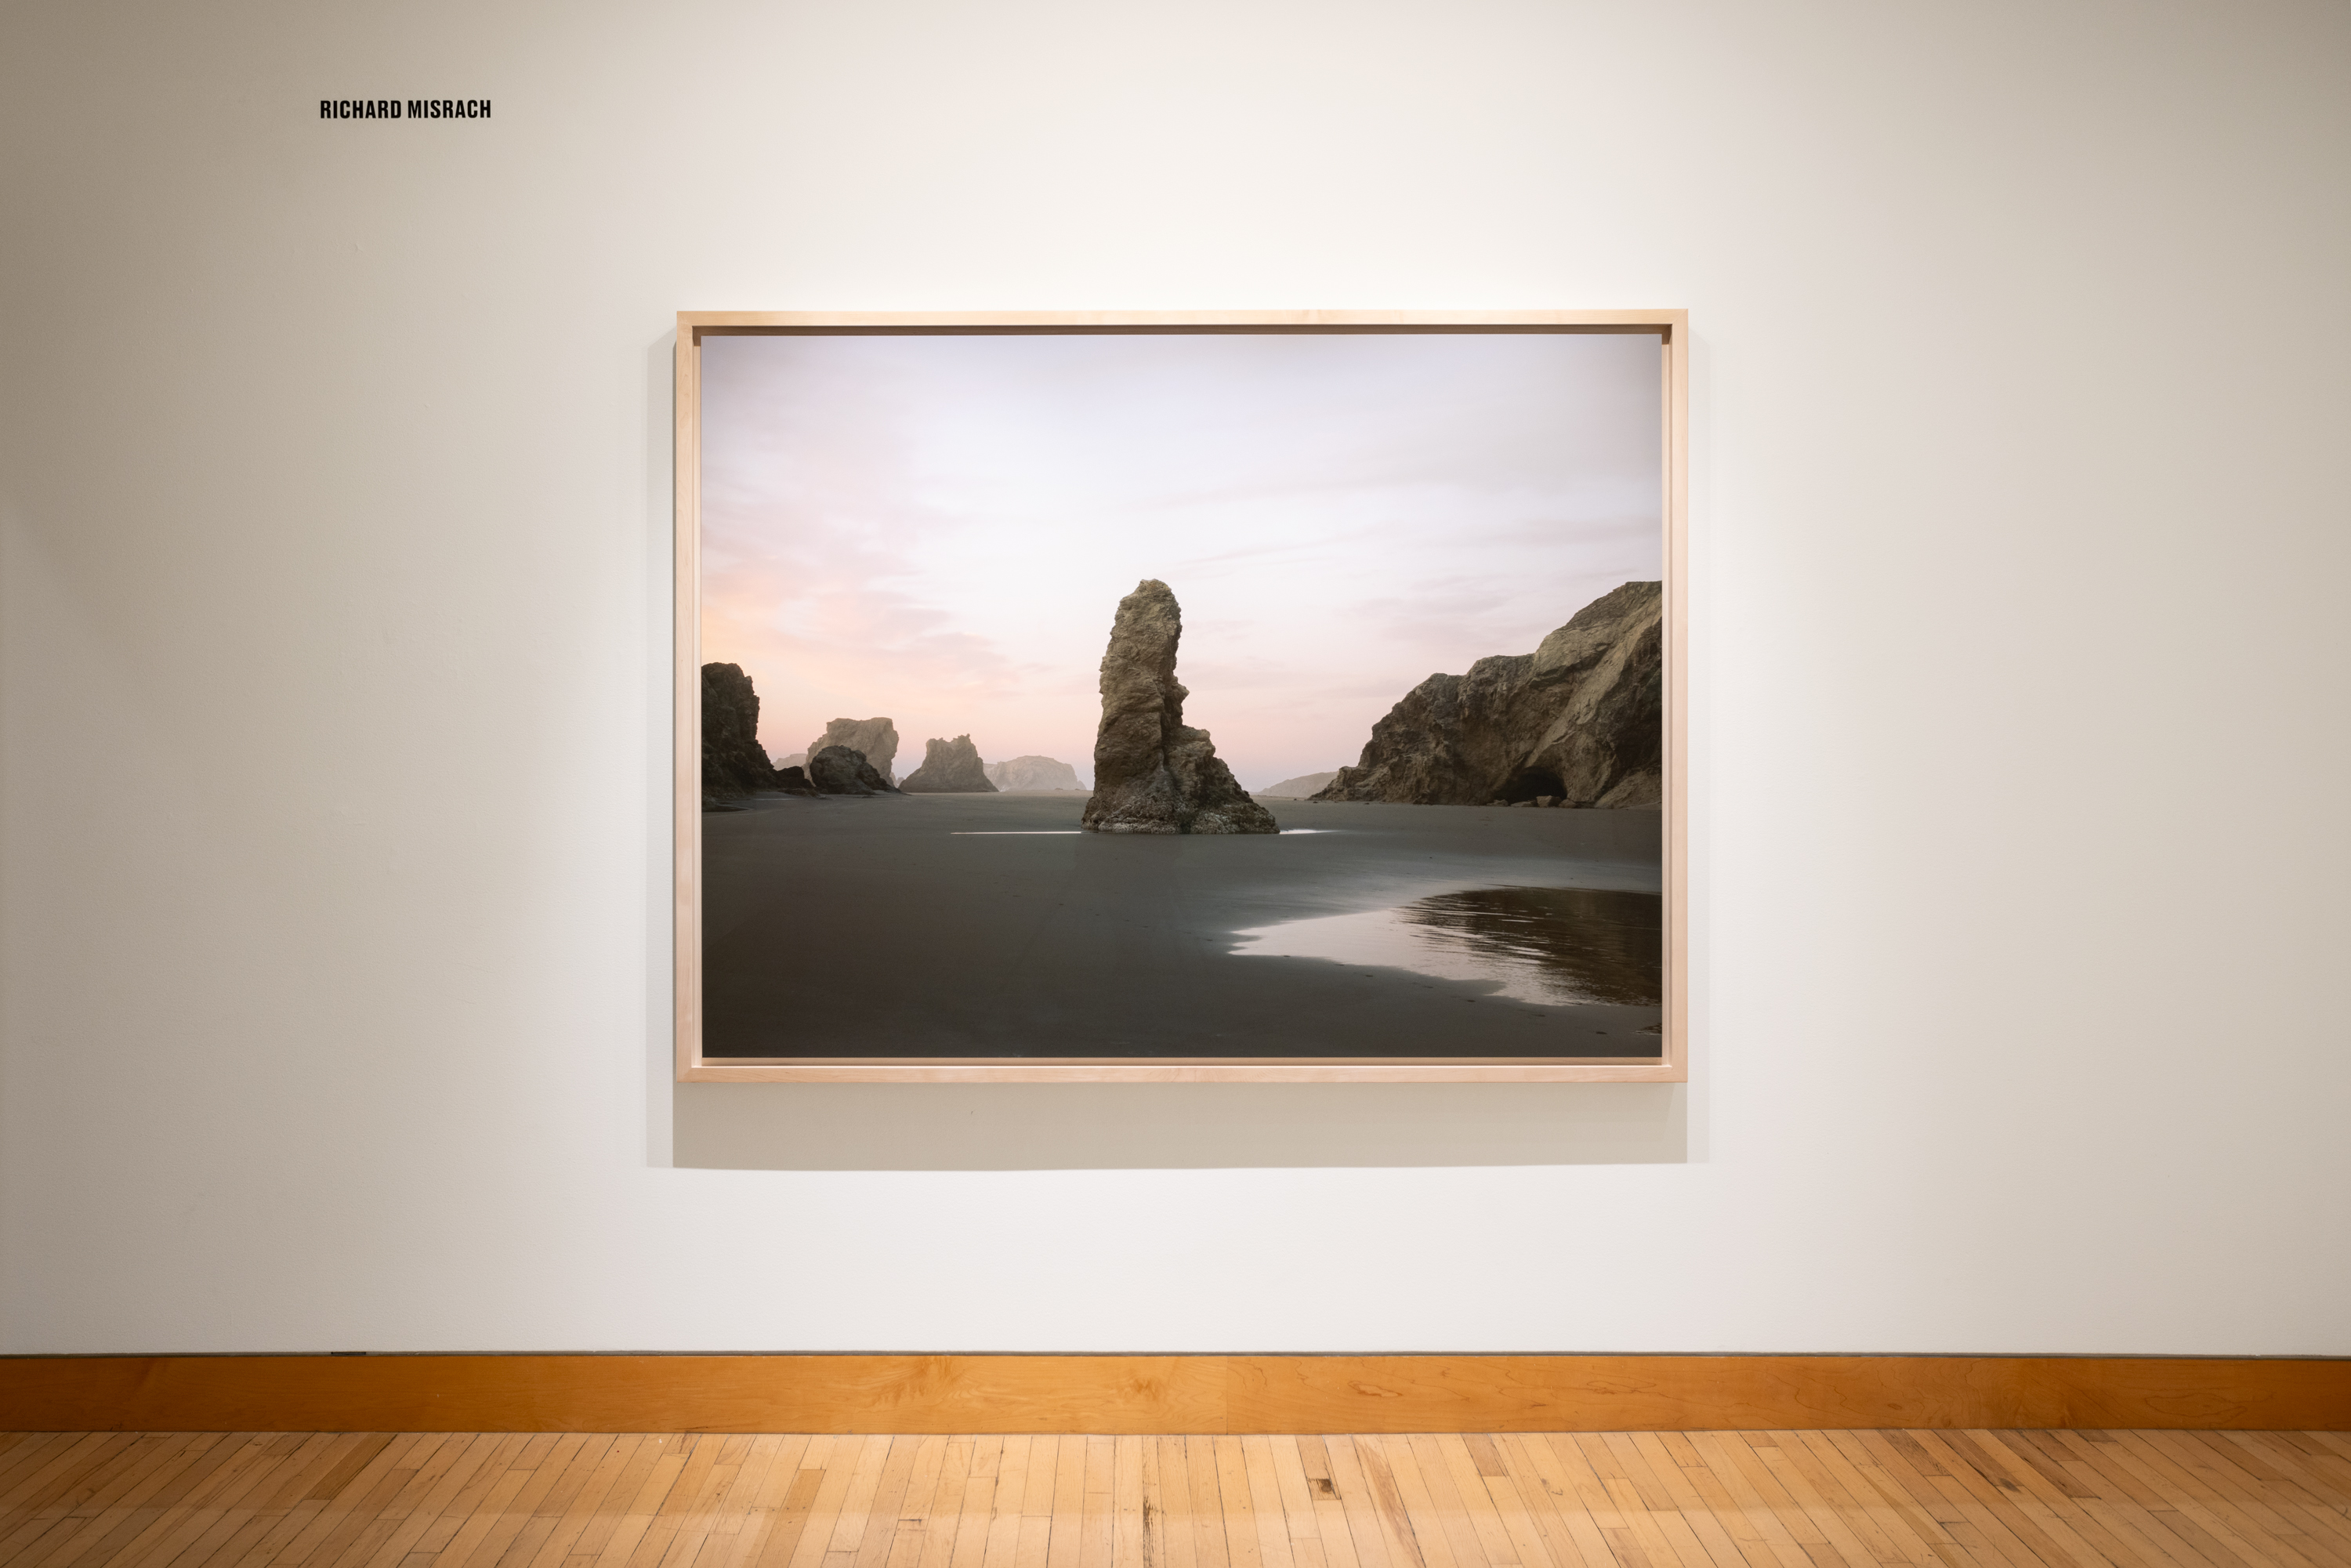 Color image of color photograph depicting a larger rock formation on the beach framed in bleached wood on white gallery wall